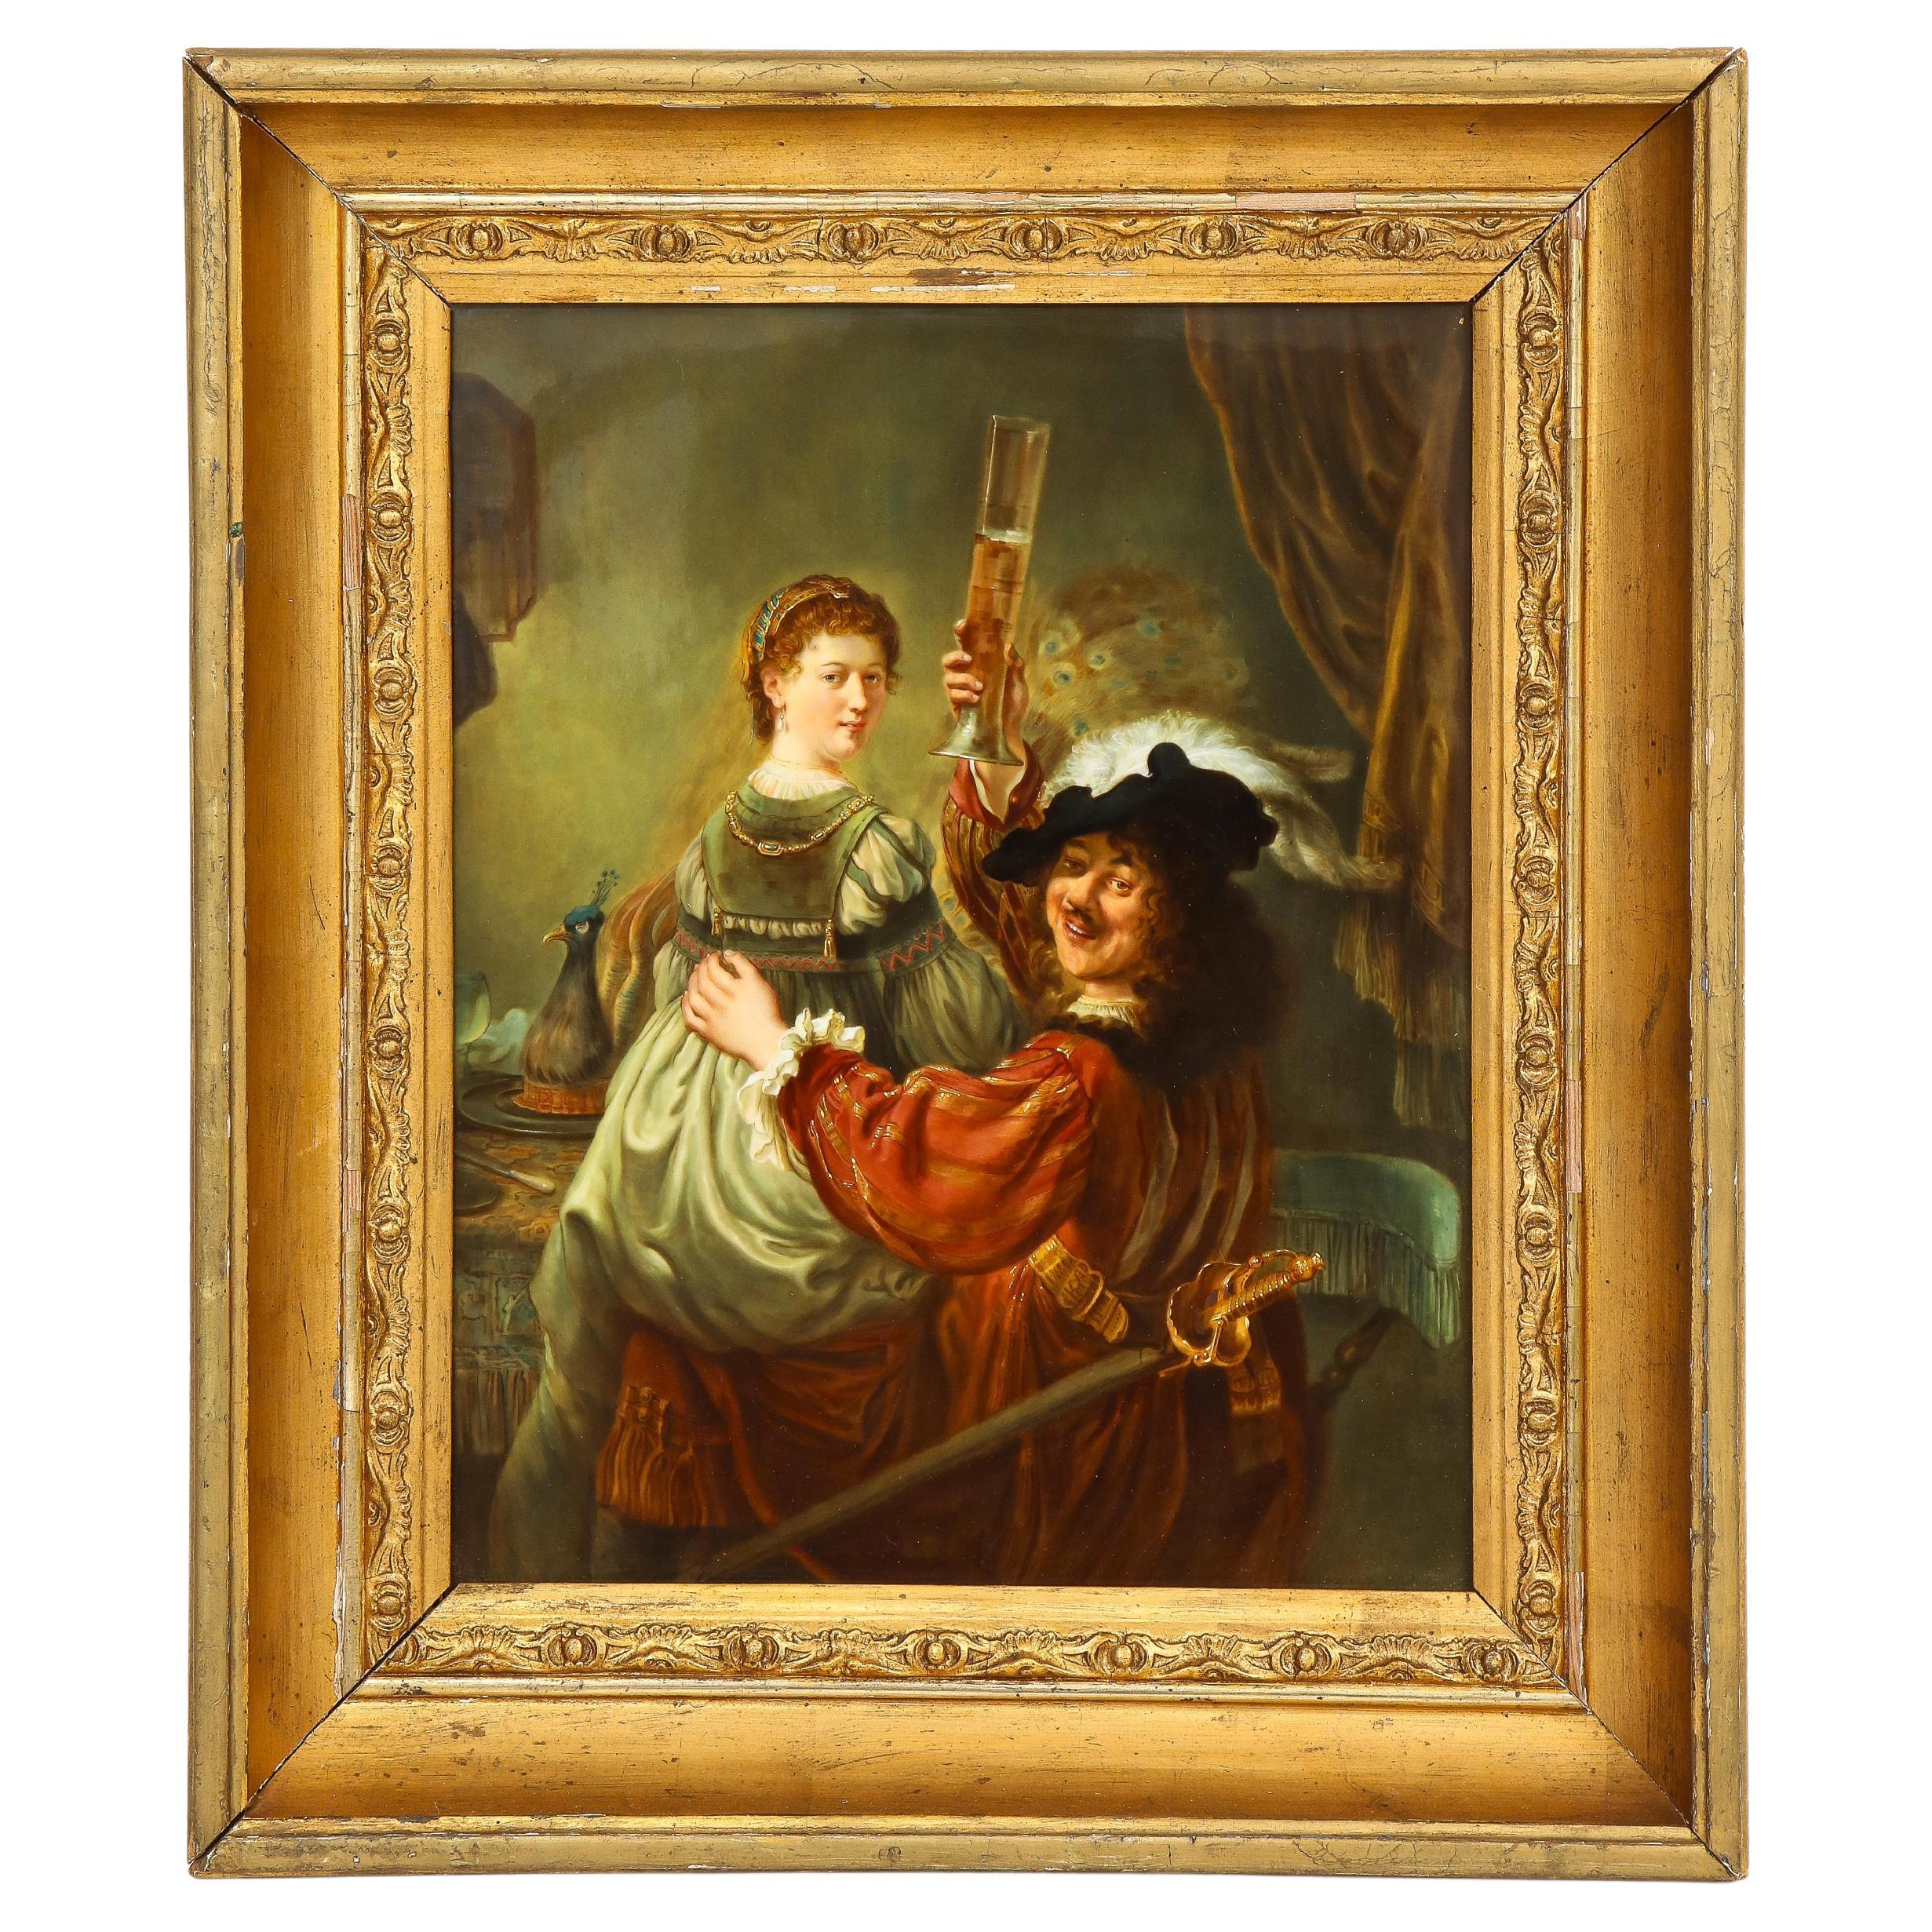 19th C. Meissen Porcelain Plaque Depicting Rembrandt and Saskia in the Tavern